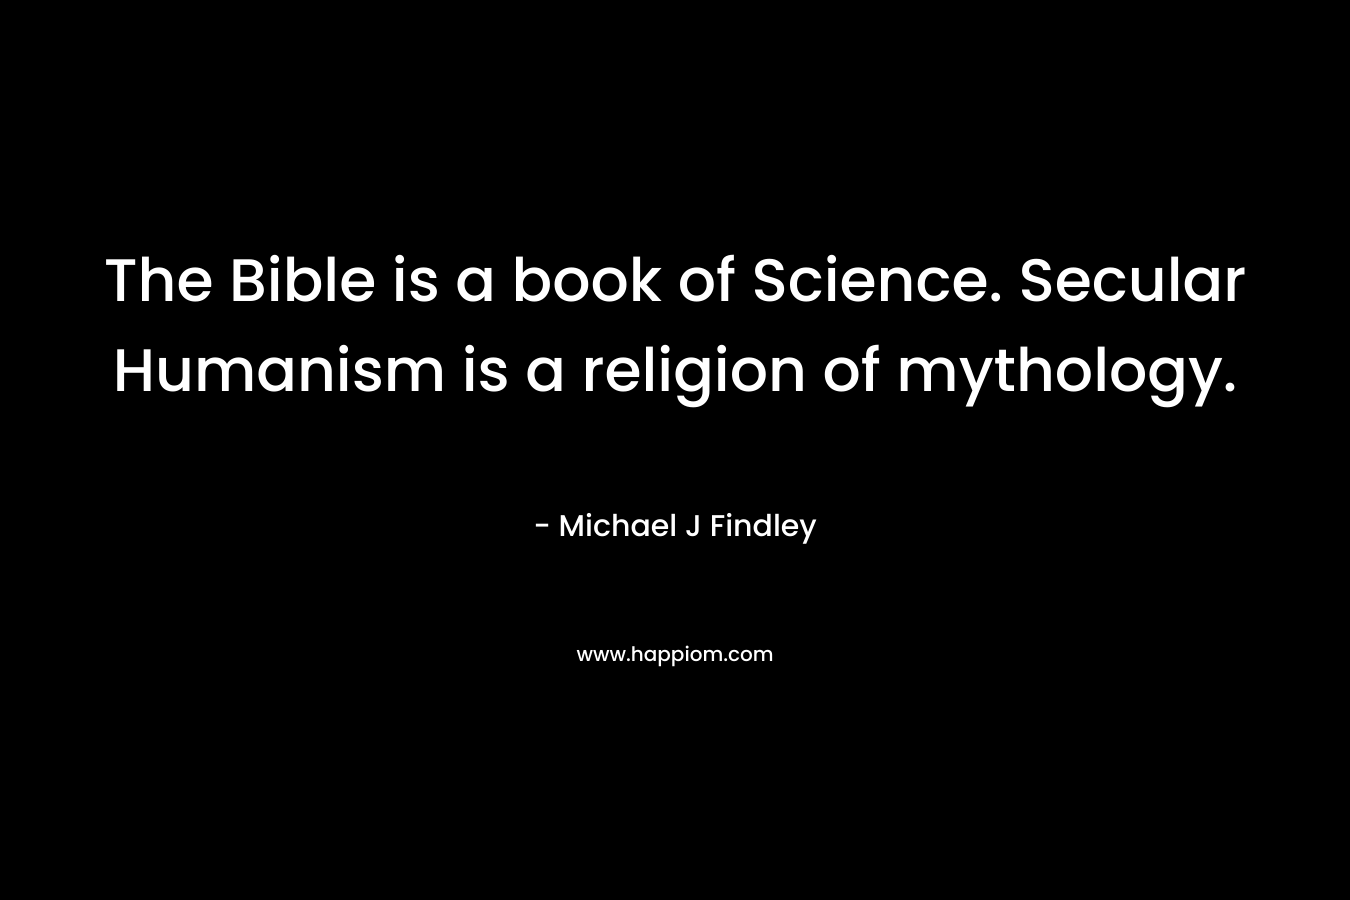 The Bible is a book of Science. Secular Humanism is a religion of mythology.